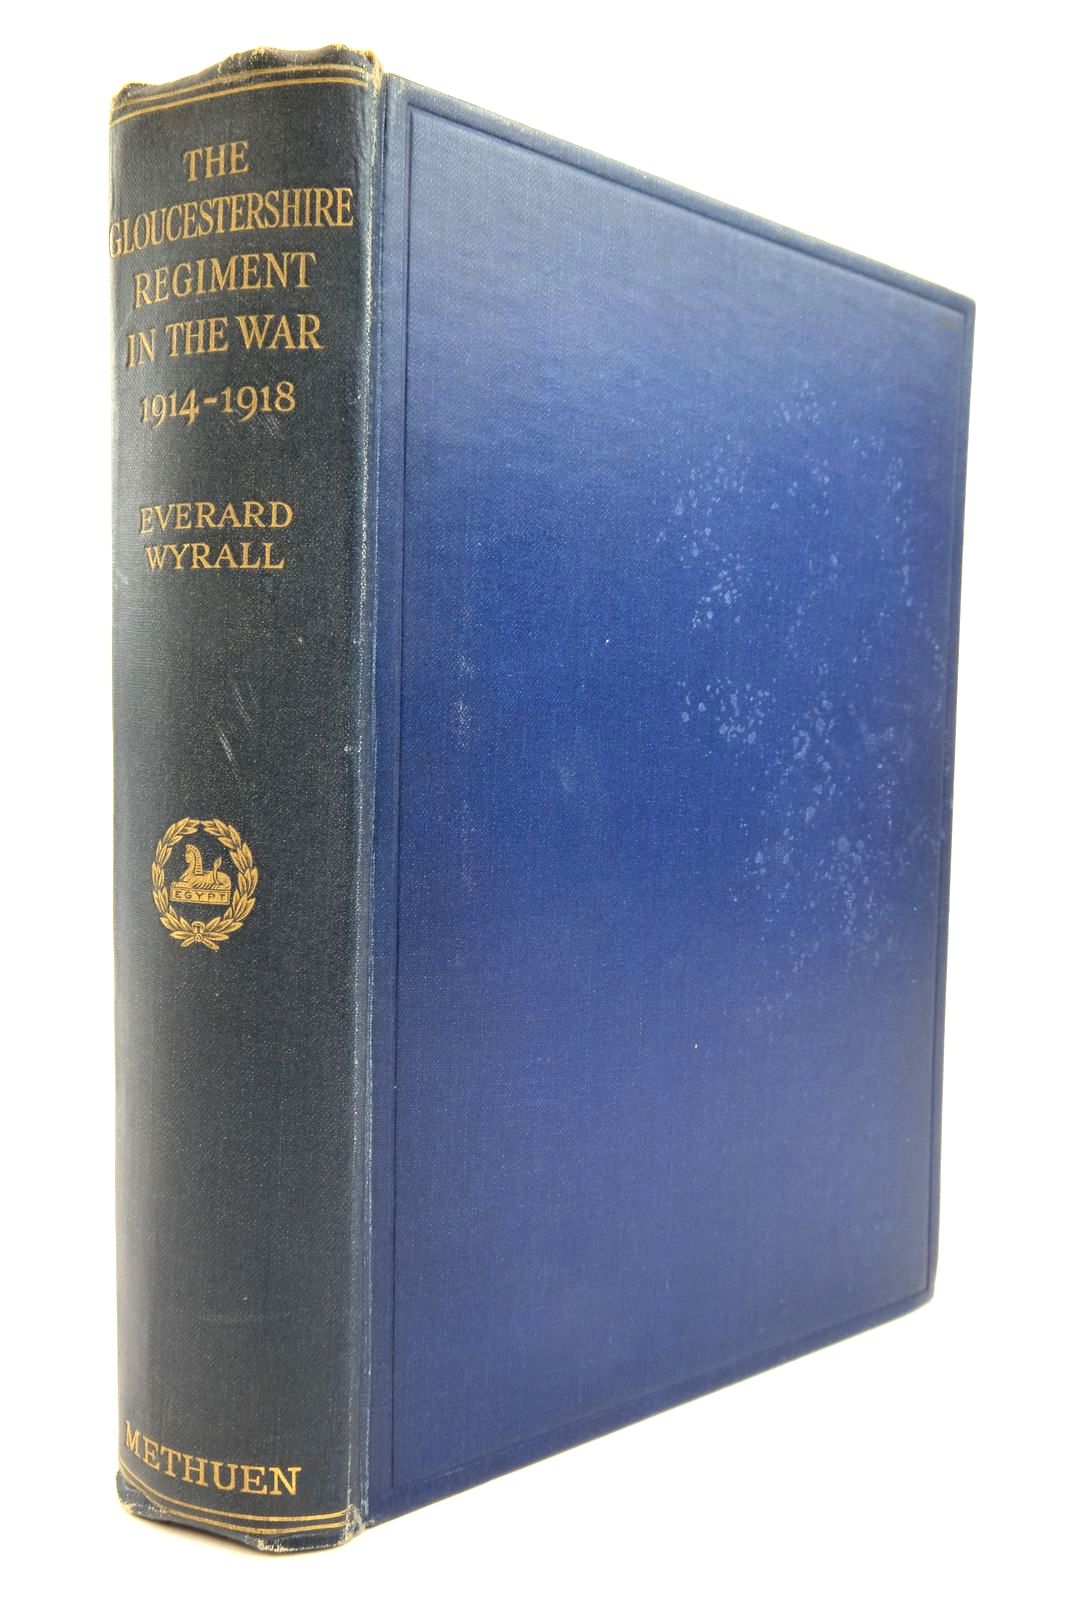 Photo of THE GLOUCESTERSHIRE REGIMENT IN THE WAR 1914-1918 written by Wyrall, Everard Milne, G.F. published by Methuen &amp; Co. Ltd. (STOCK CODE: 2137379)  for sale by Stella & Rose's Books